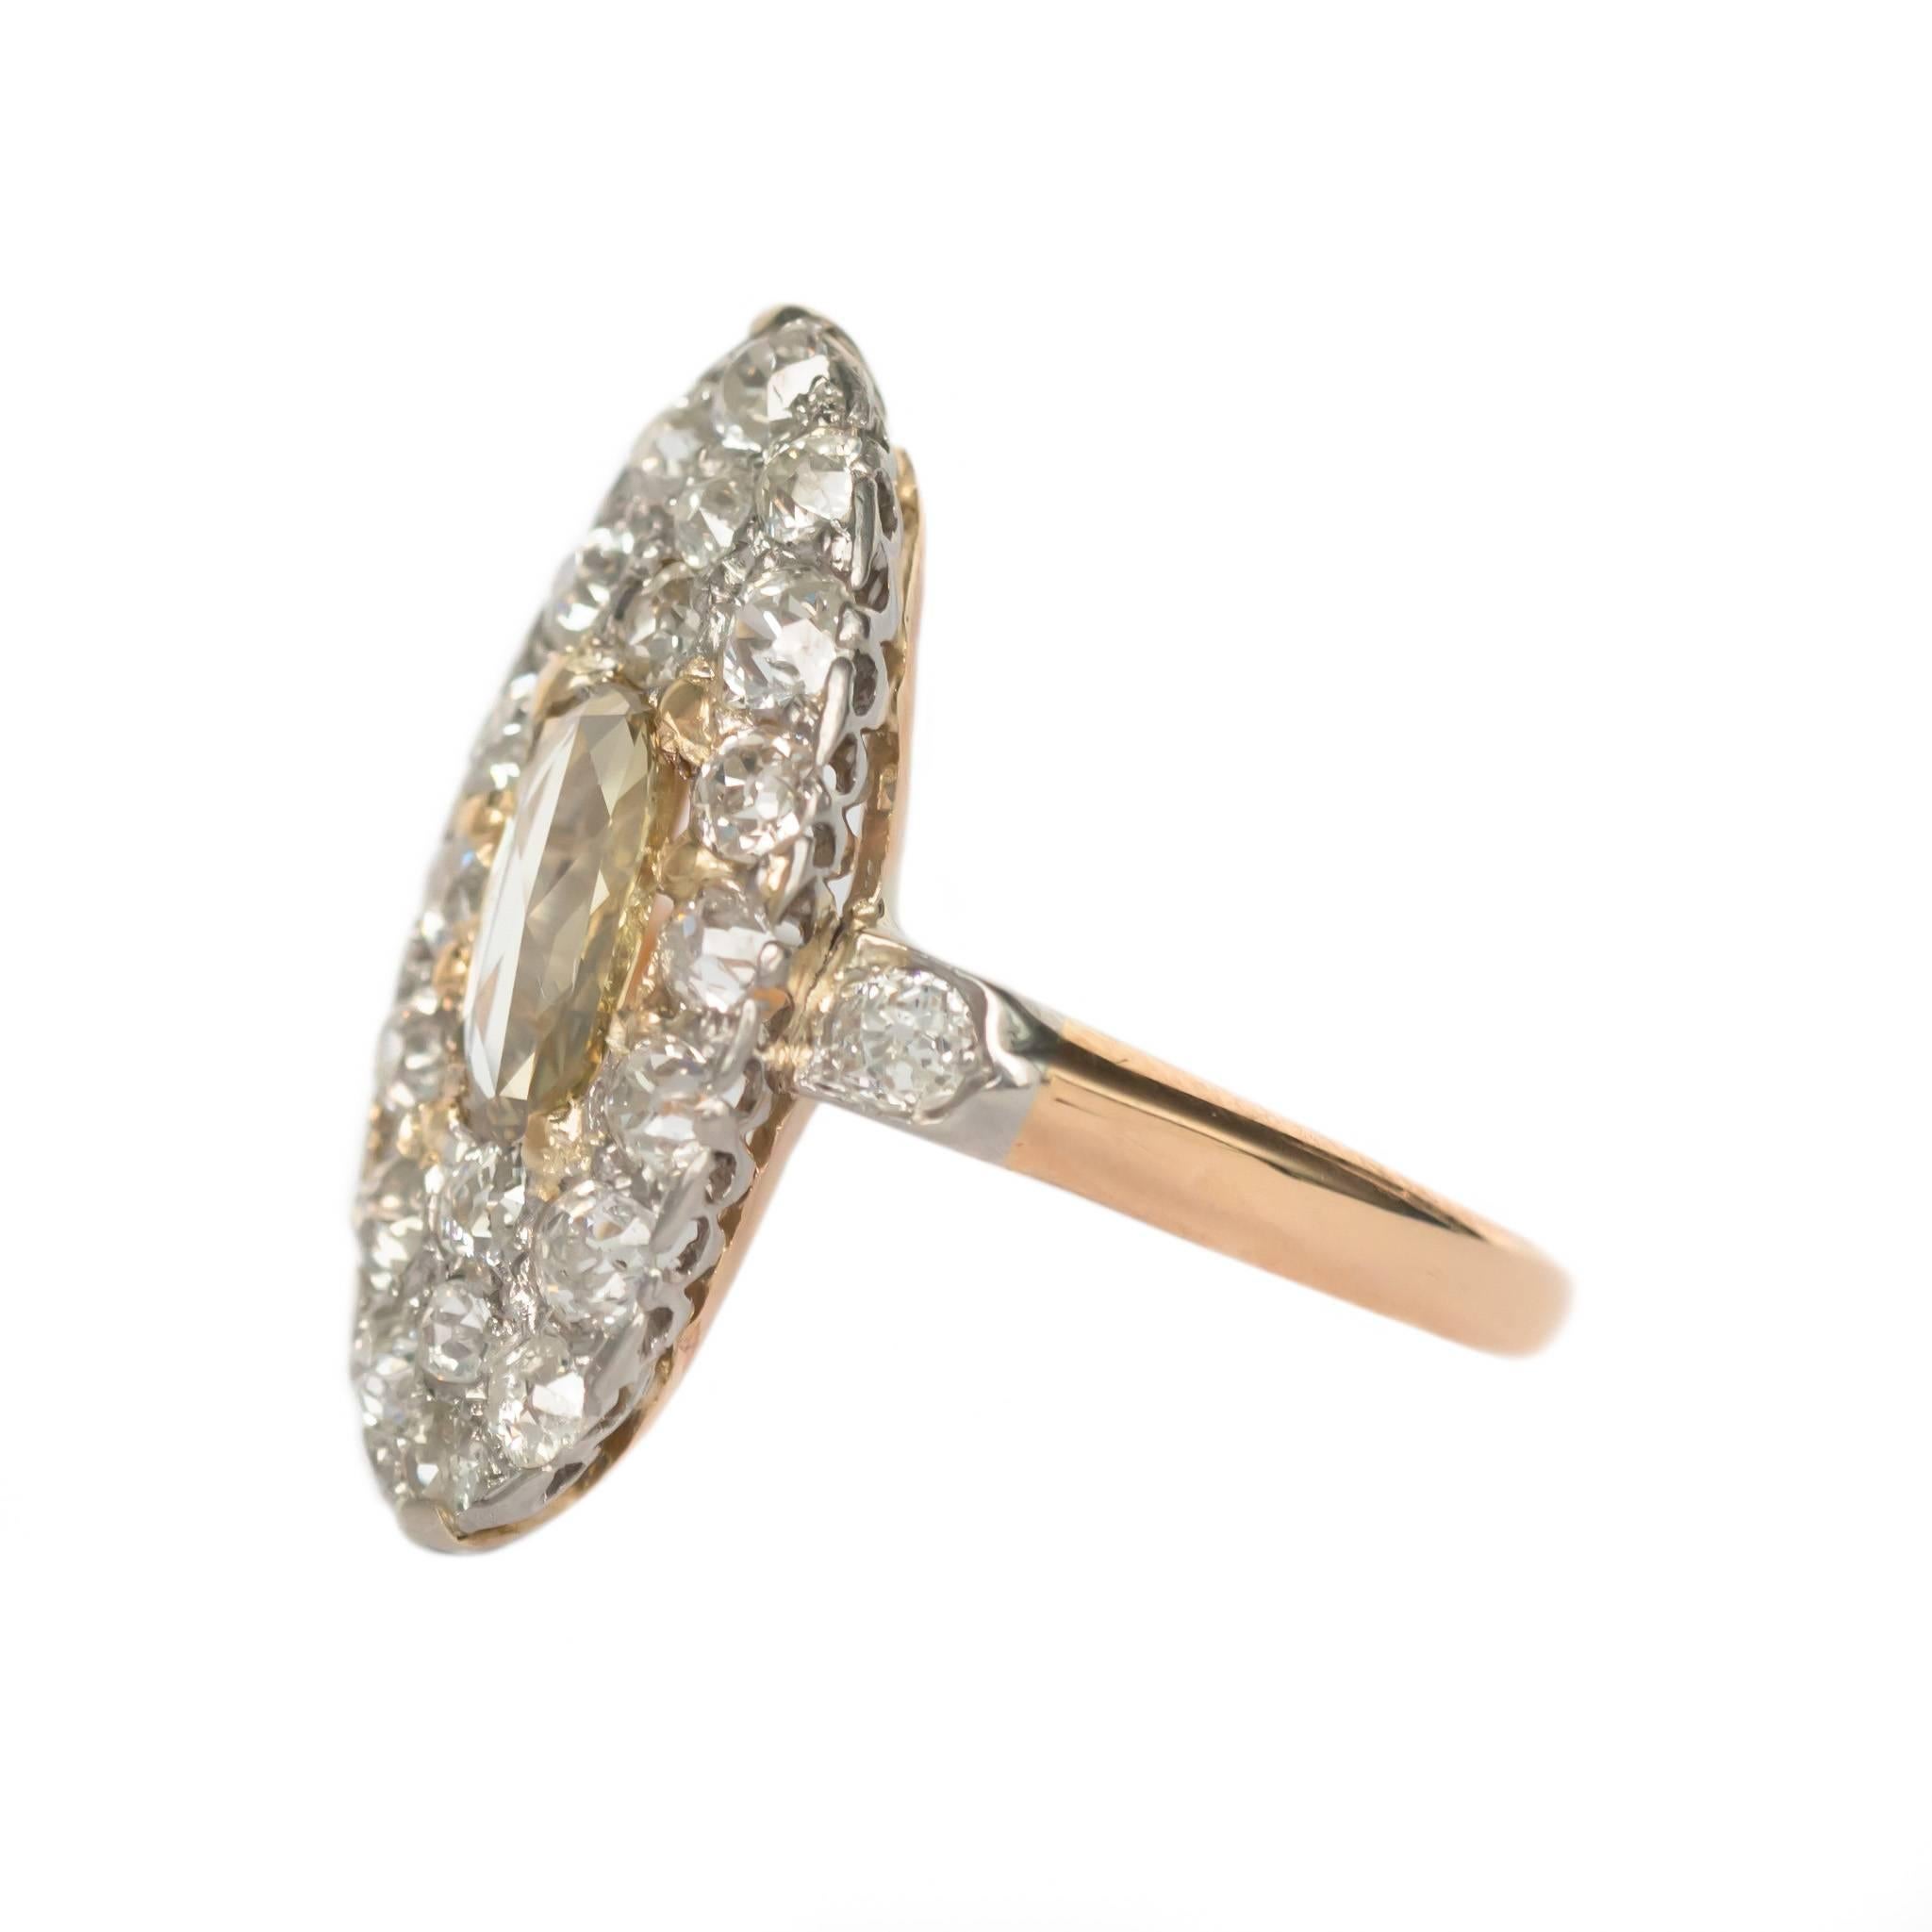 Item Details: 
Ring Size: 7
Metal Type: 14 Karat Yellow Gold
Weight: 5.3 grams

Center Diamond Details:
Shape: Rose Cut
Carat Weight: .45 carat
Color: Fancy Yellow
Clarity: VS1

Side Stone Details: 
Shape: Old Mine Cut
Total Carat Weight: 1.00